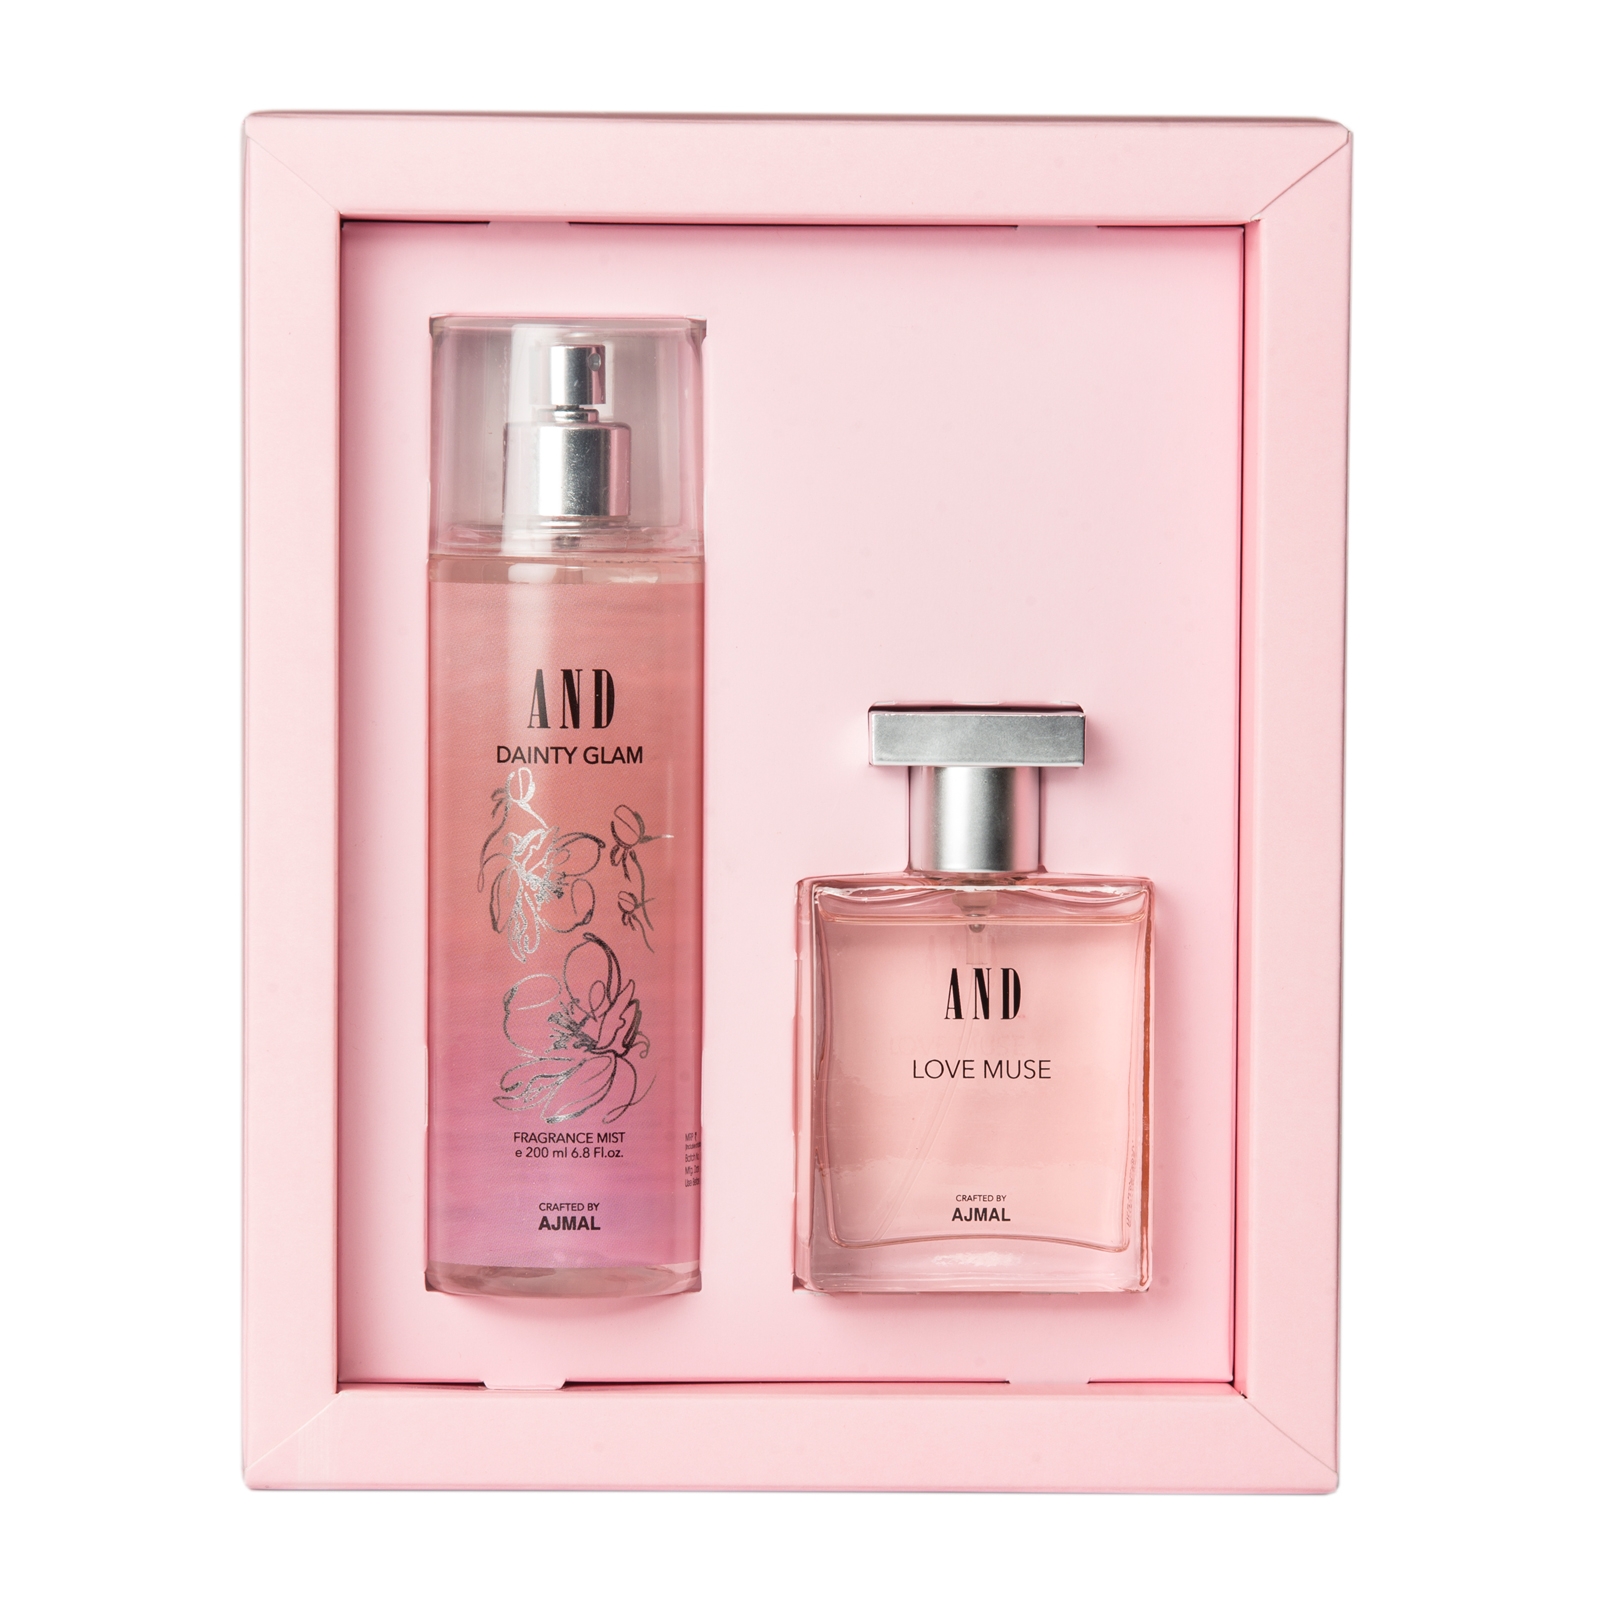 AND Crafted By Ajmal | AND Love Muse Eau De Parfum 50ML & Dainty Glam Body Mist 200ML for Women Crafted by Ajmal